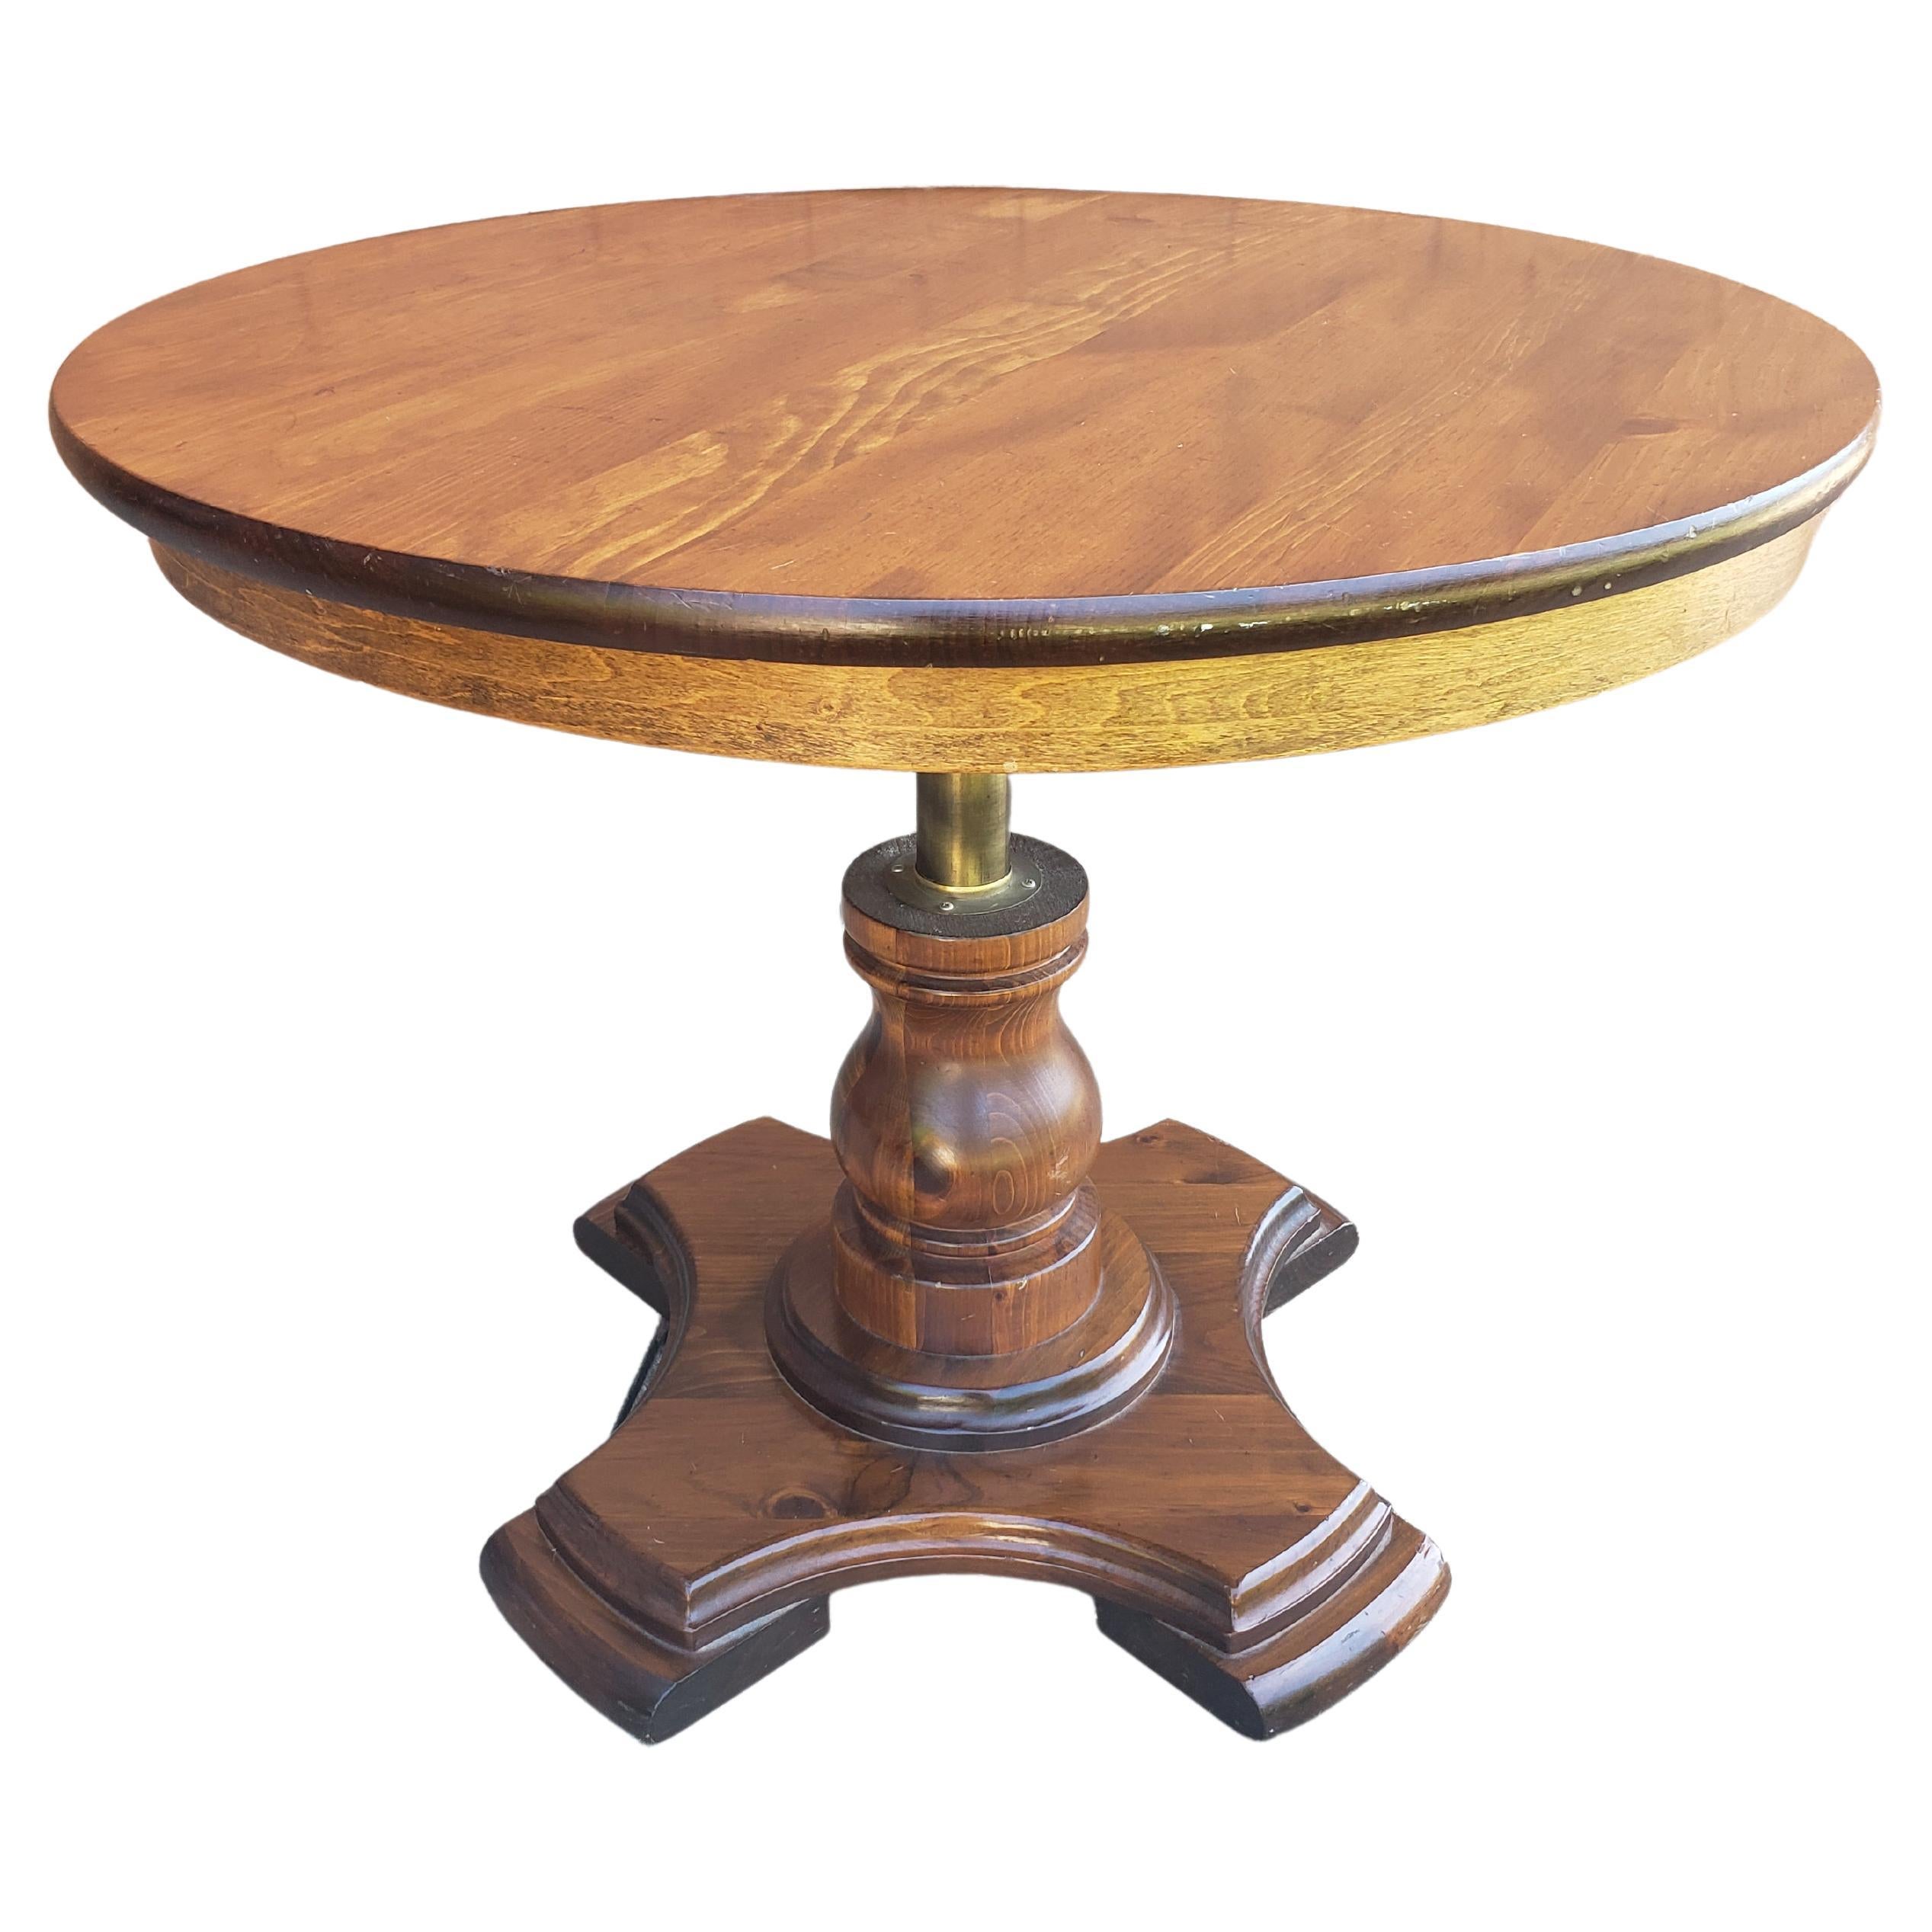 American Classical style solid pine and brass pedestal quad feet center table. Top will come off for easy handling or storage.
Measuring 36 inches in diameter and standing 29 inches tall.